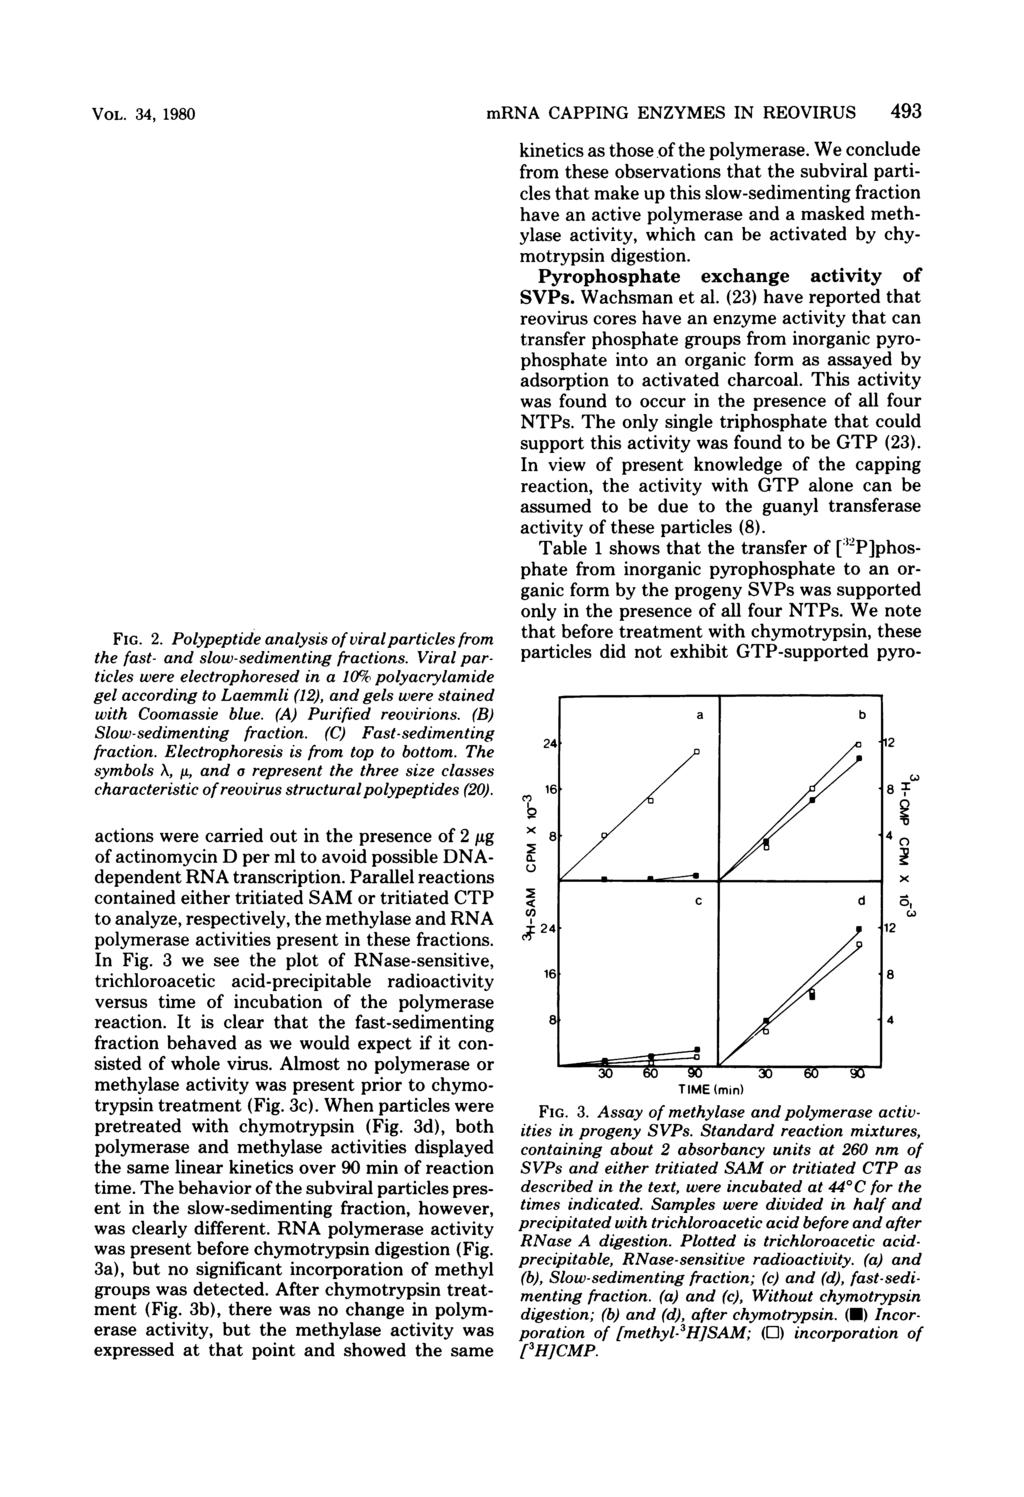 VOL. 34, 1980 U 1 2- cr 3M,A Co. FIG. 2. Polypeptide analysis of viralparticles from the fast- and slow-sedimenting fractions.